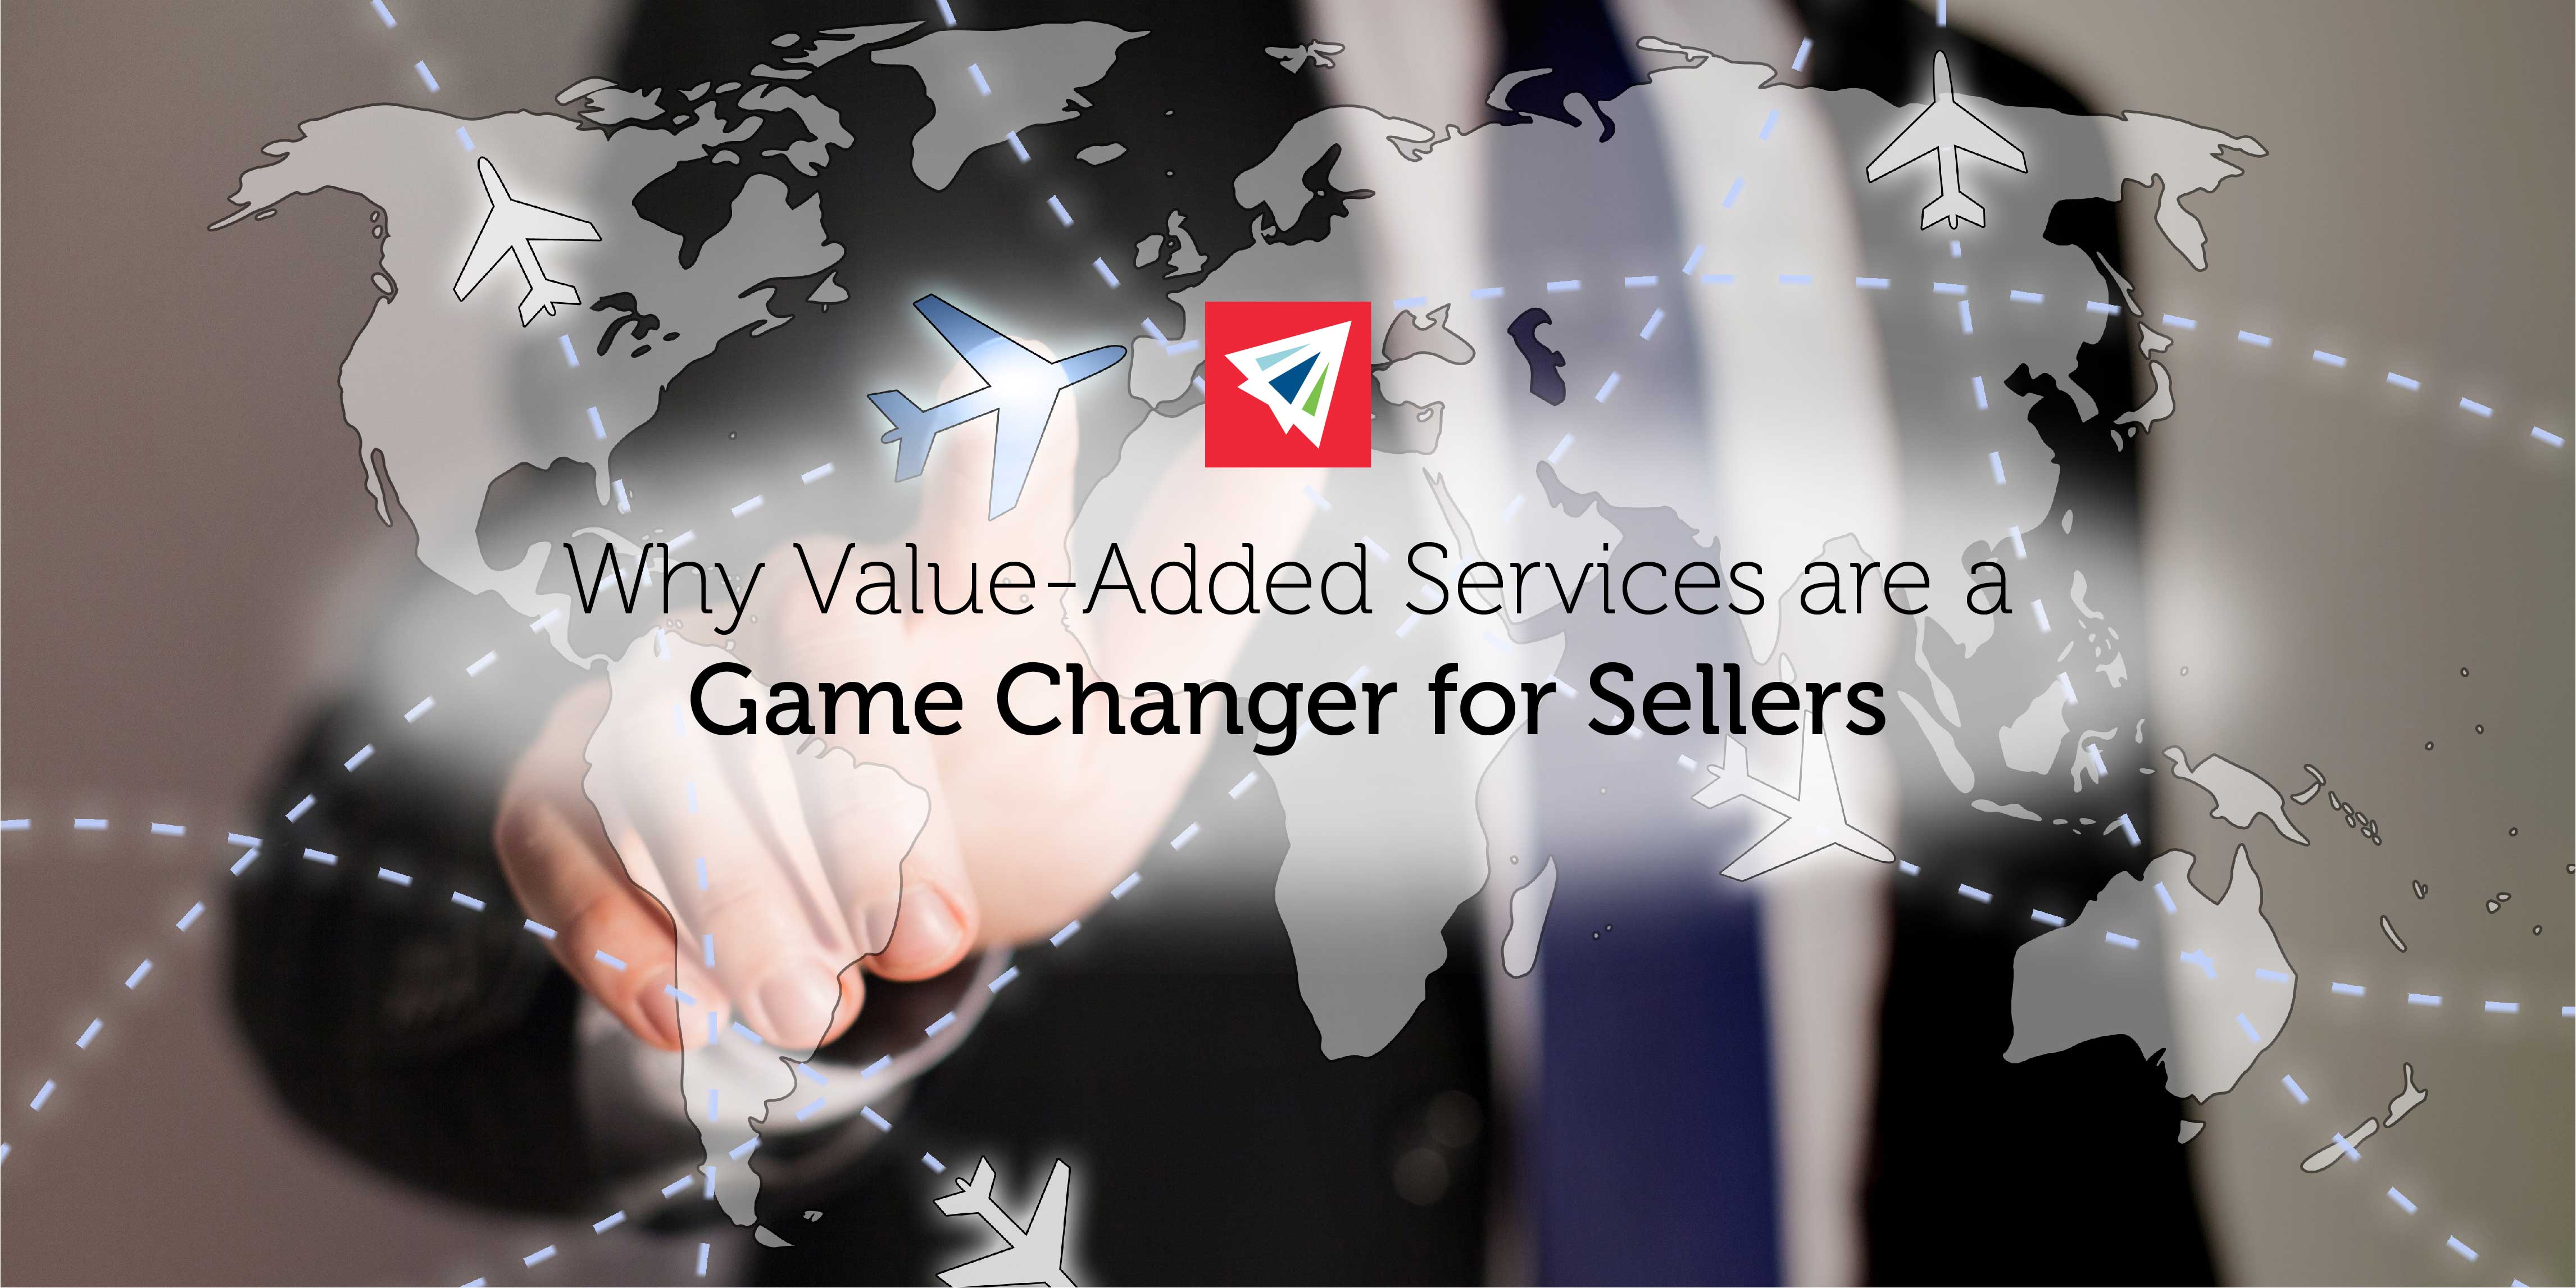 Why Value Added Services are a Game Changer for Sellers